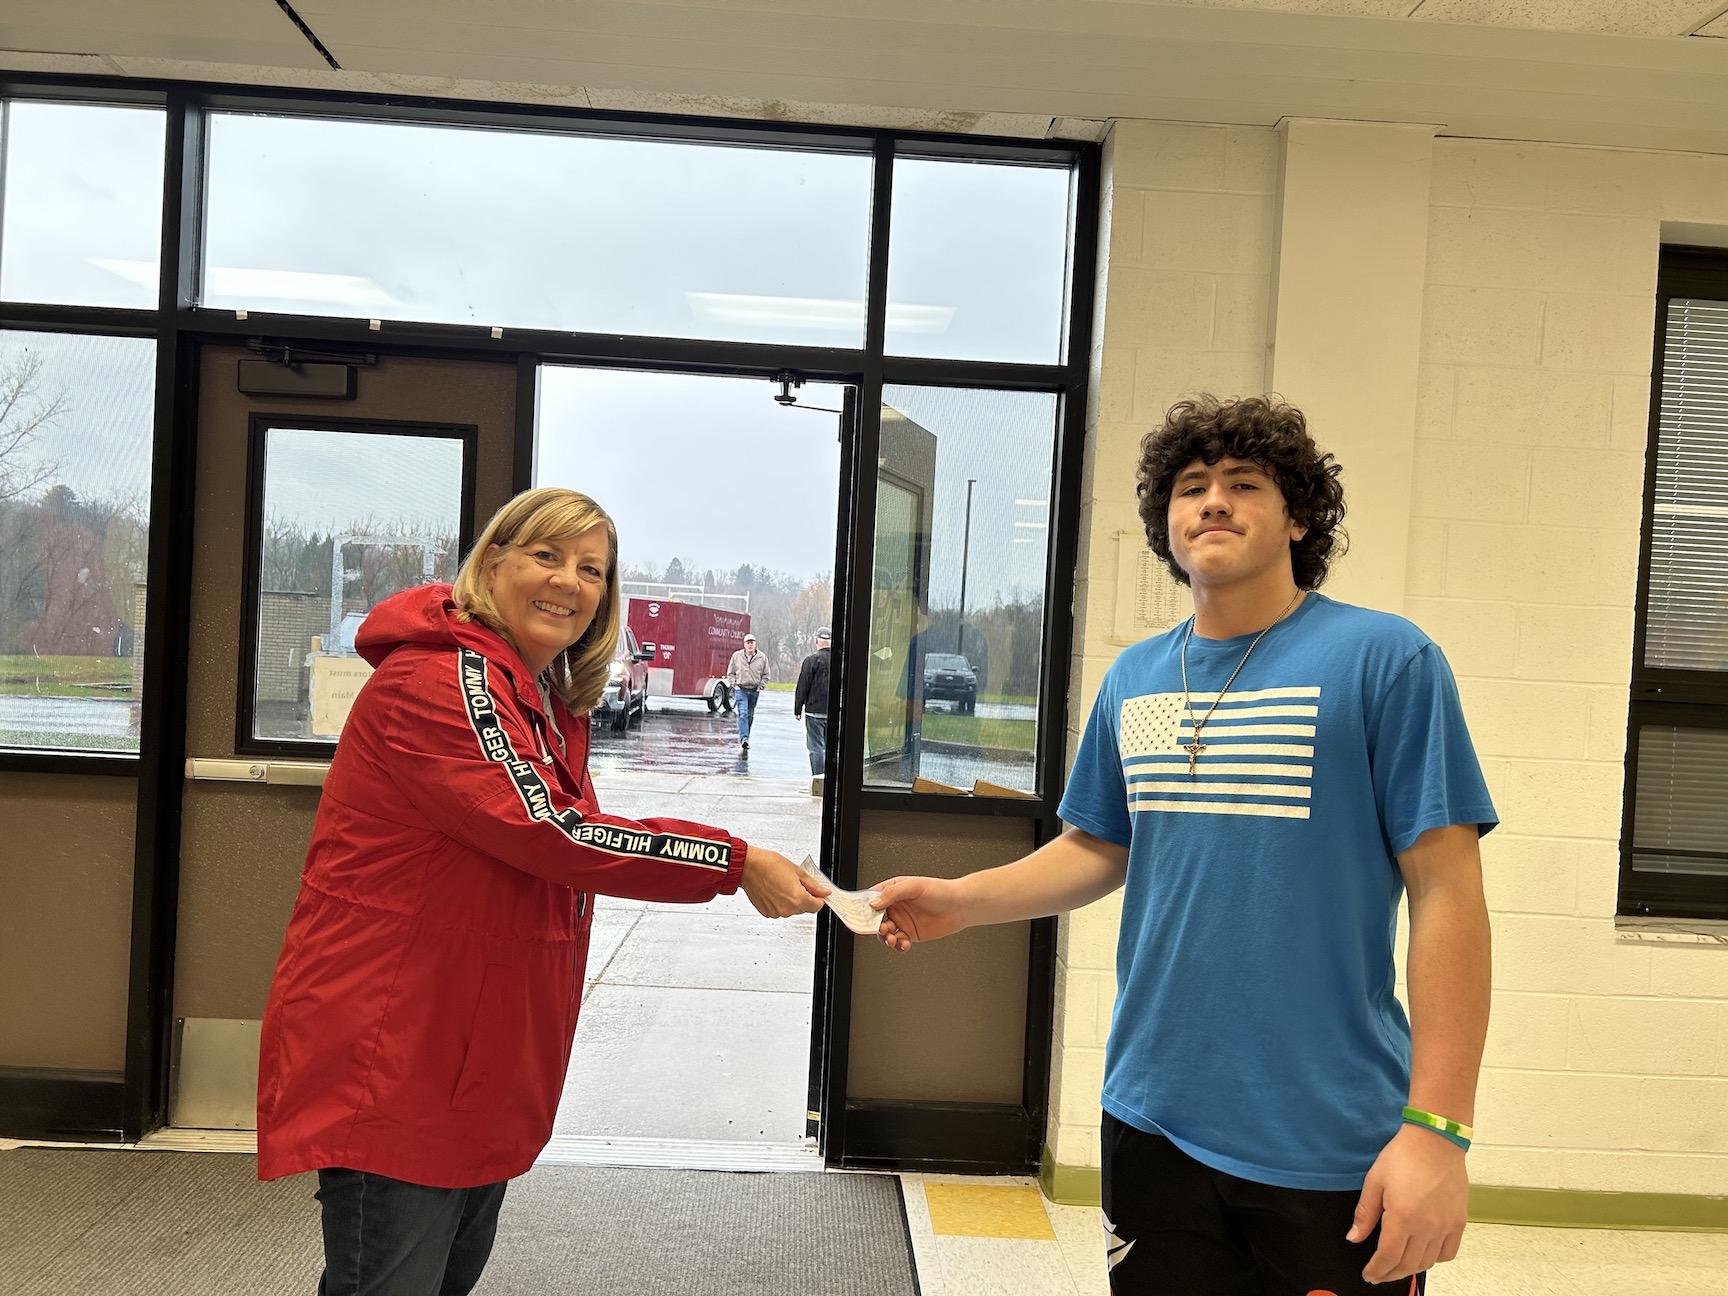 Mrs. French from Community United Methodist Church accepts a monetary donation from Tanner DeStefano